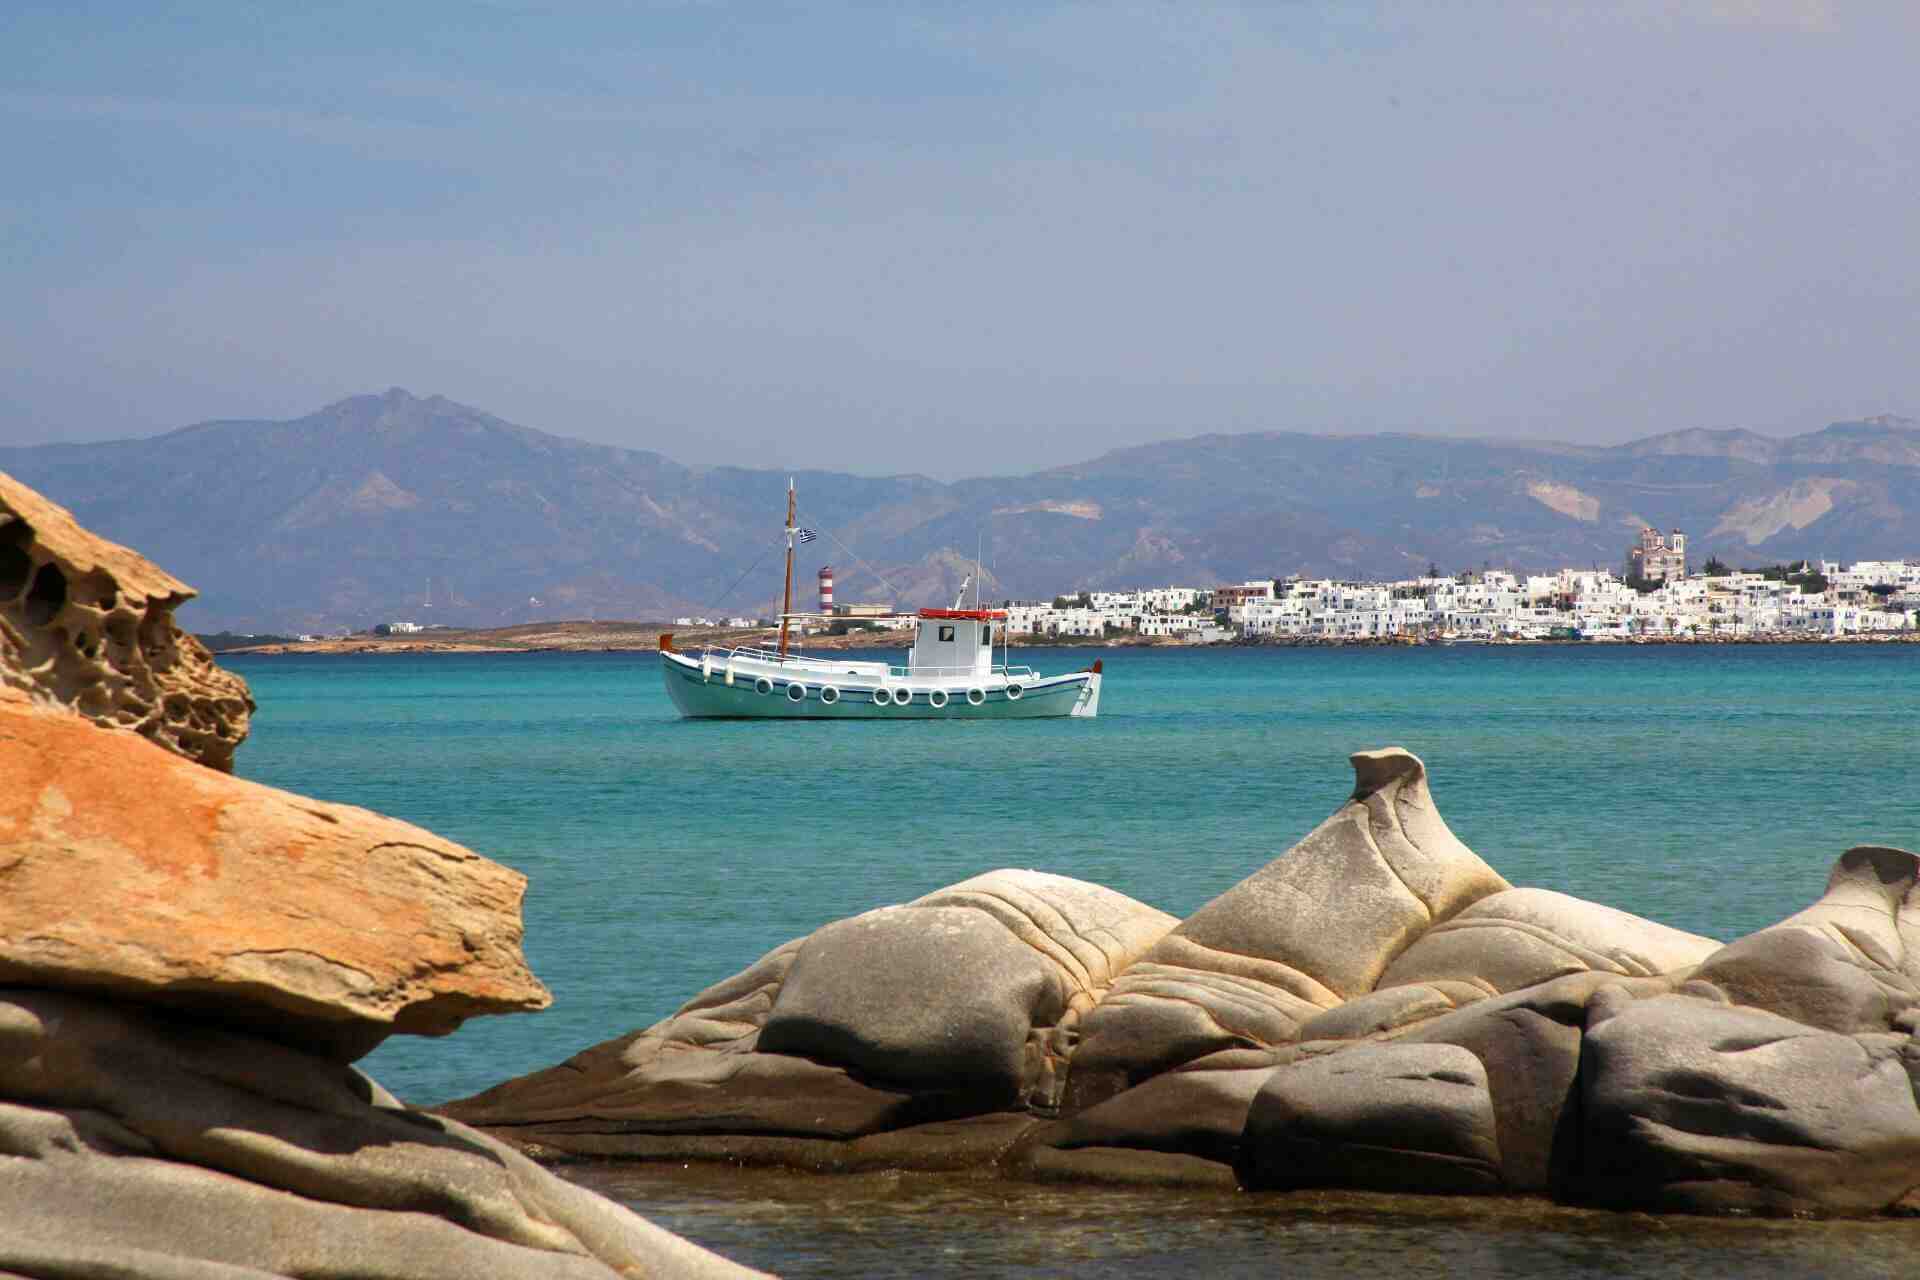 Image gallery 3: What is the most beautiful island of the Cyclades?